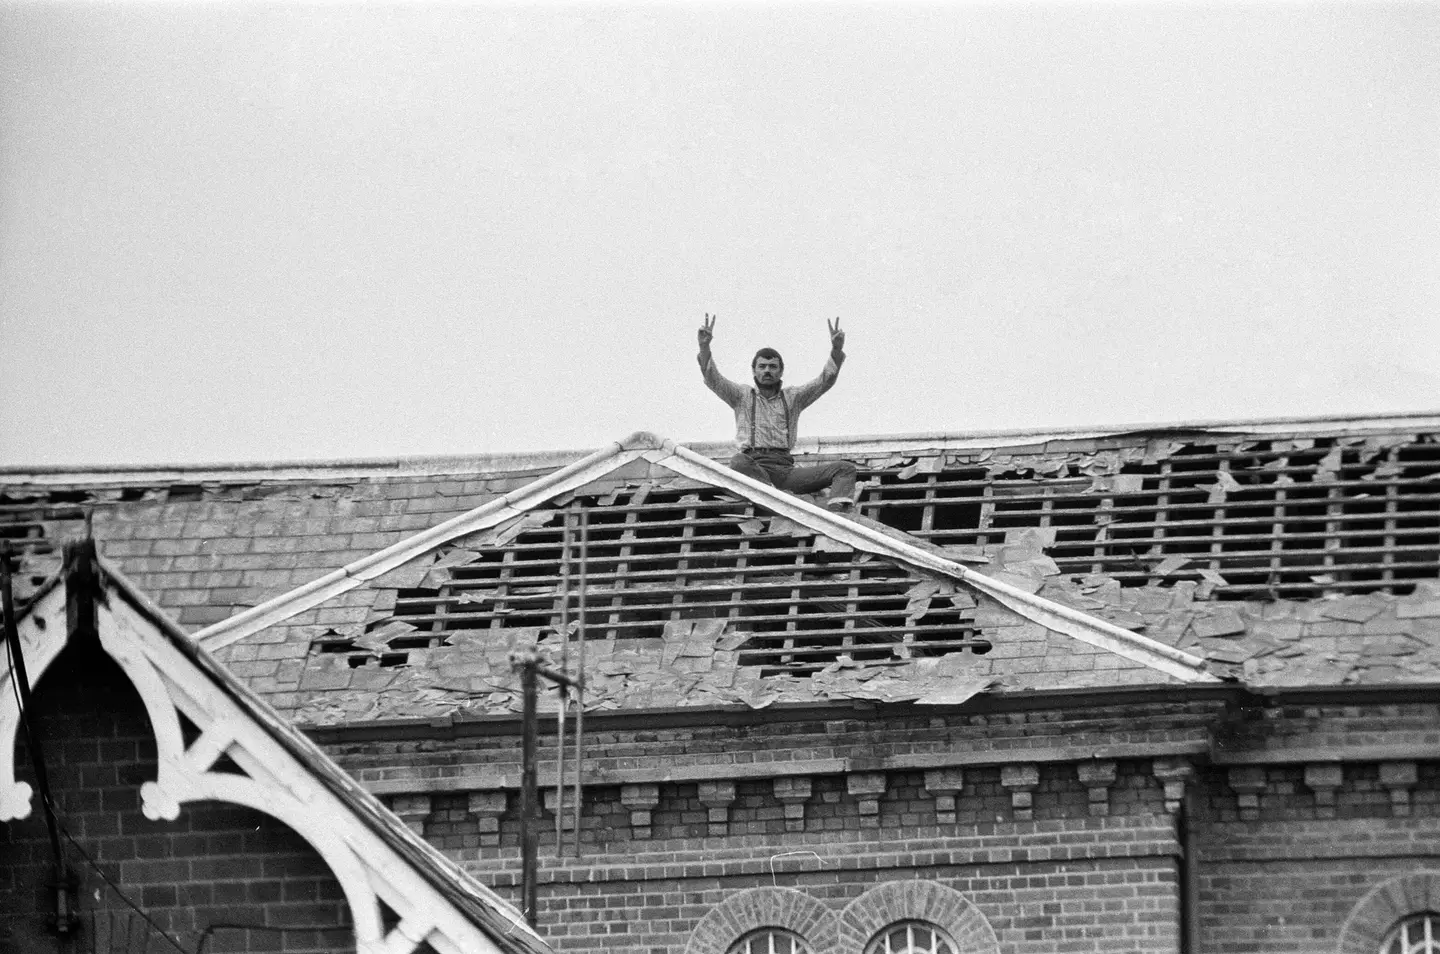 Charles Bronson stages a protest on the roof of Broadmoor Hospital